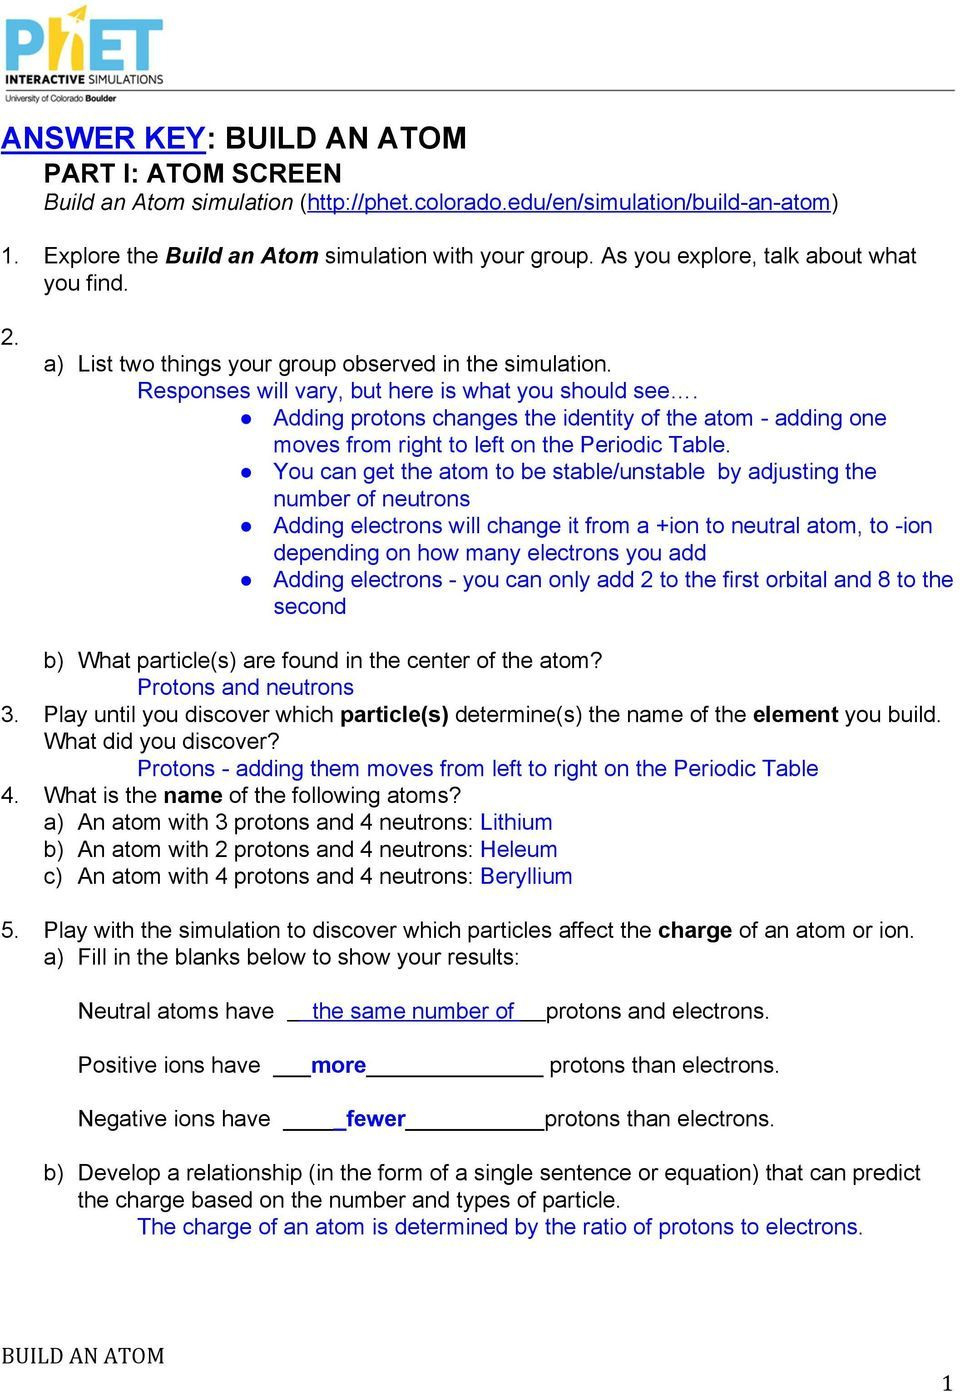 Key Terms Electricity Worksheet Answers Chapter 7 - db ...